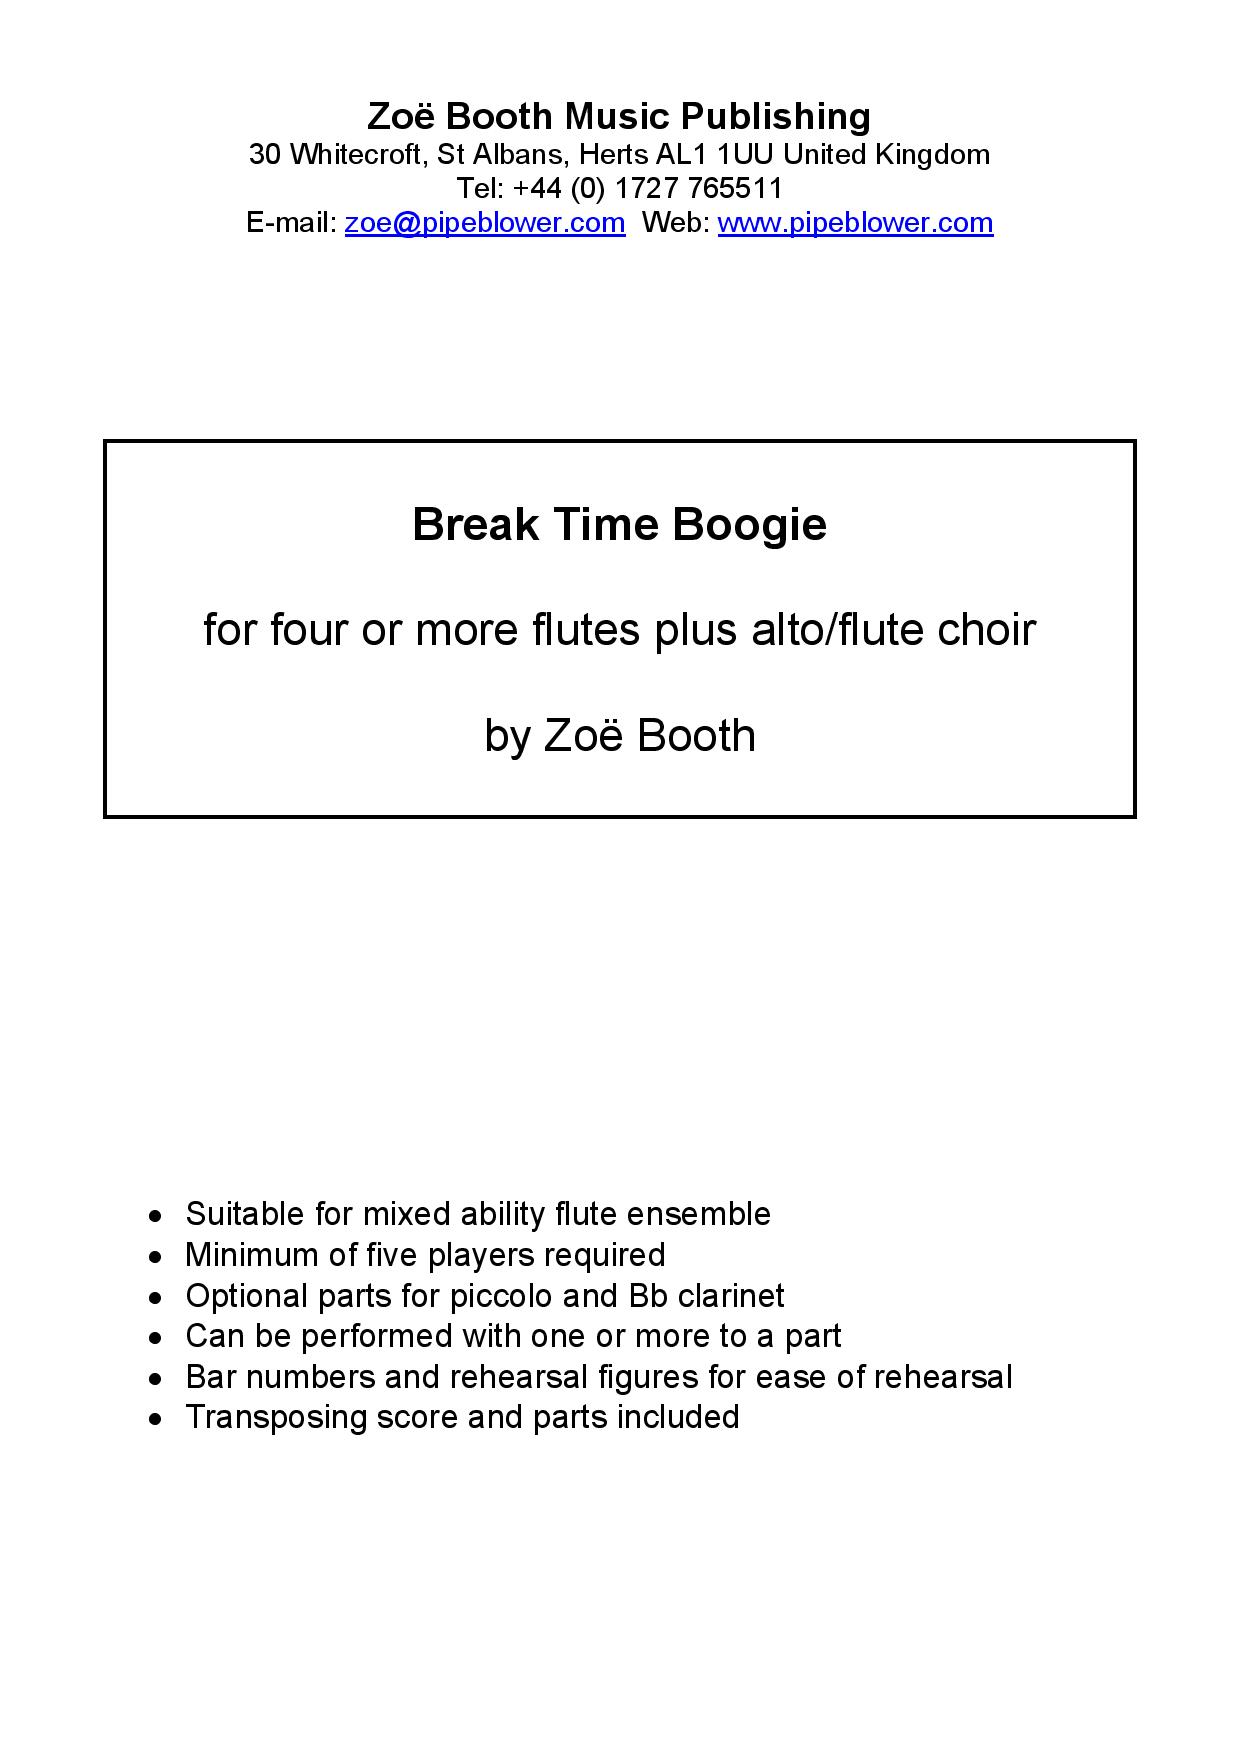 Breaktime Boogie  by Zoë Booth for five or more flutes/flute choir